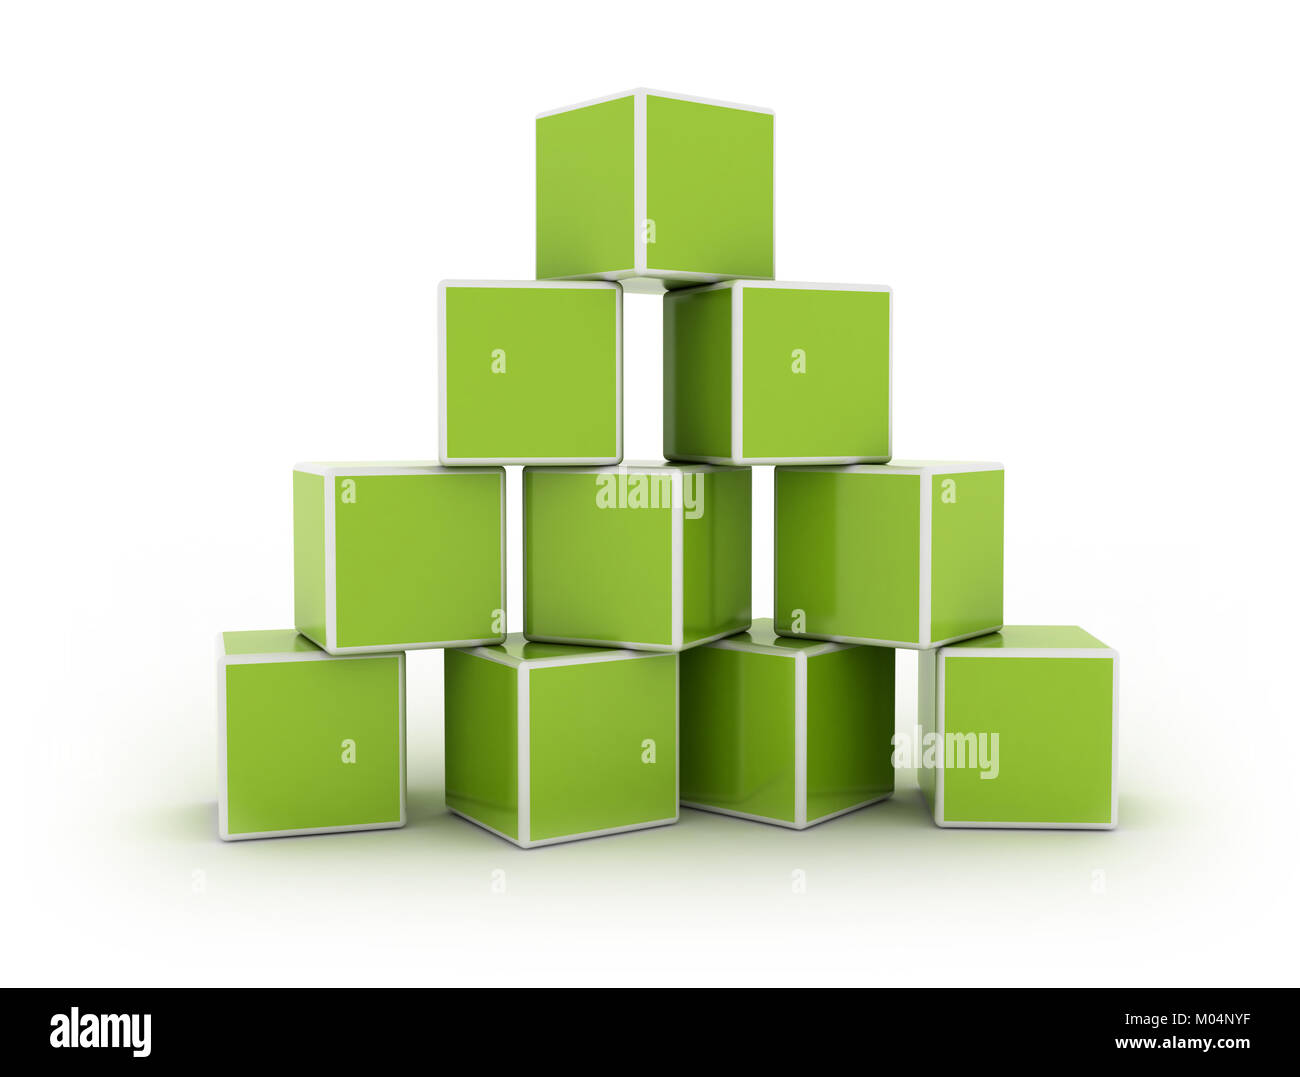 Green boxes stacked in a pyramid shape Stock Photo